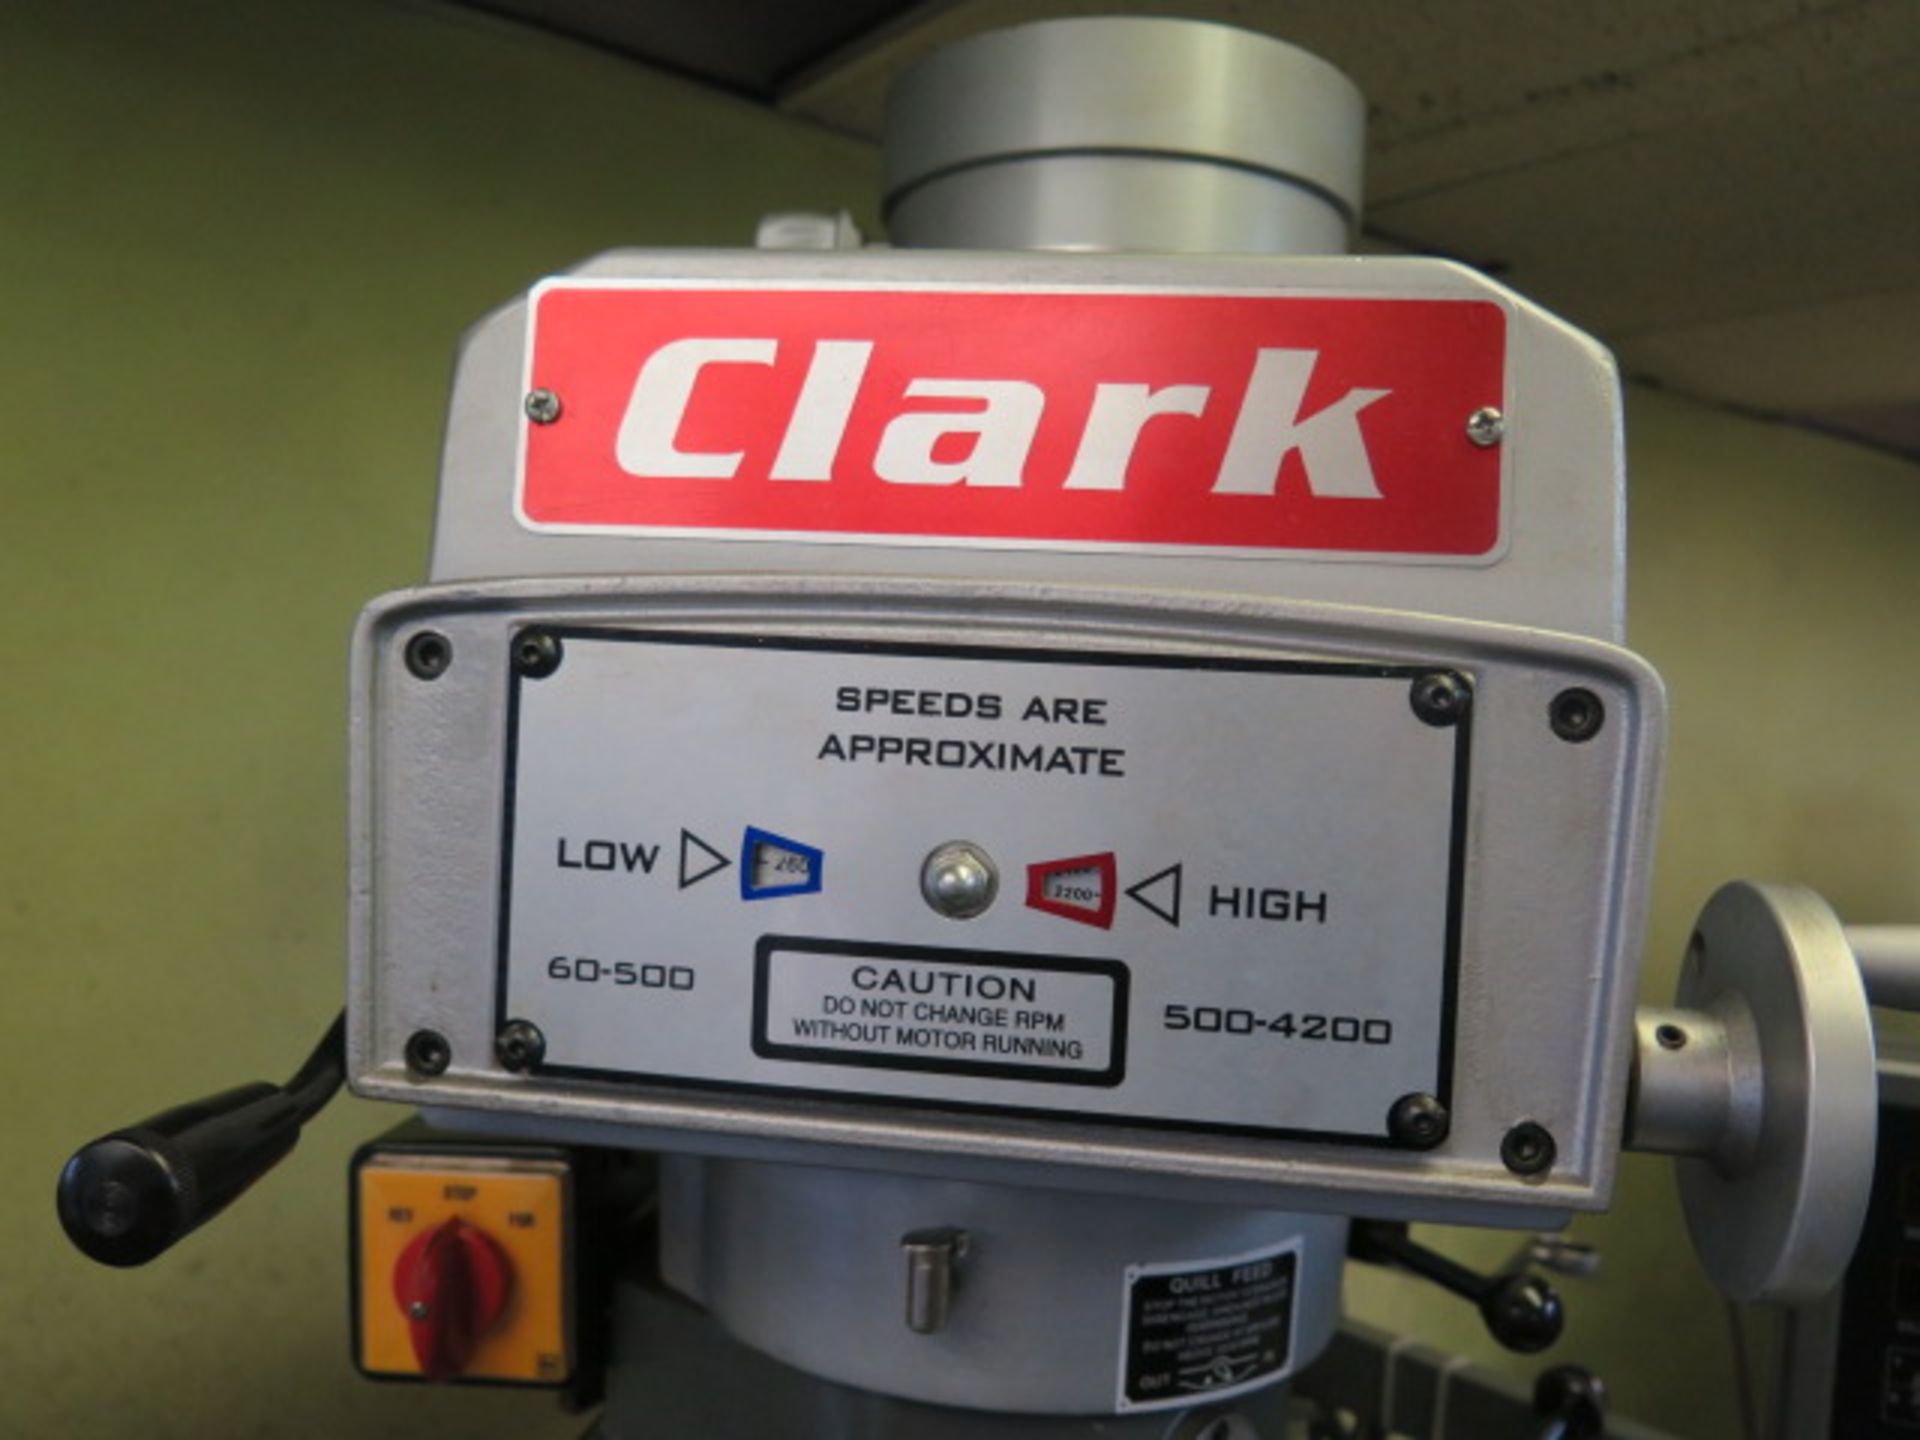 2015 Clark B3V Vertical Mill s/n 150237 w/ Sino SDS6-2V Programmable DRO, 3Hp Motor, SOLD AS IS - Image 9 of 9